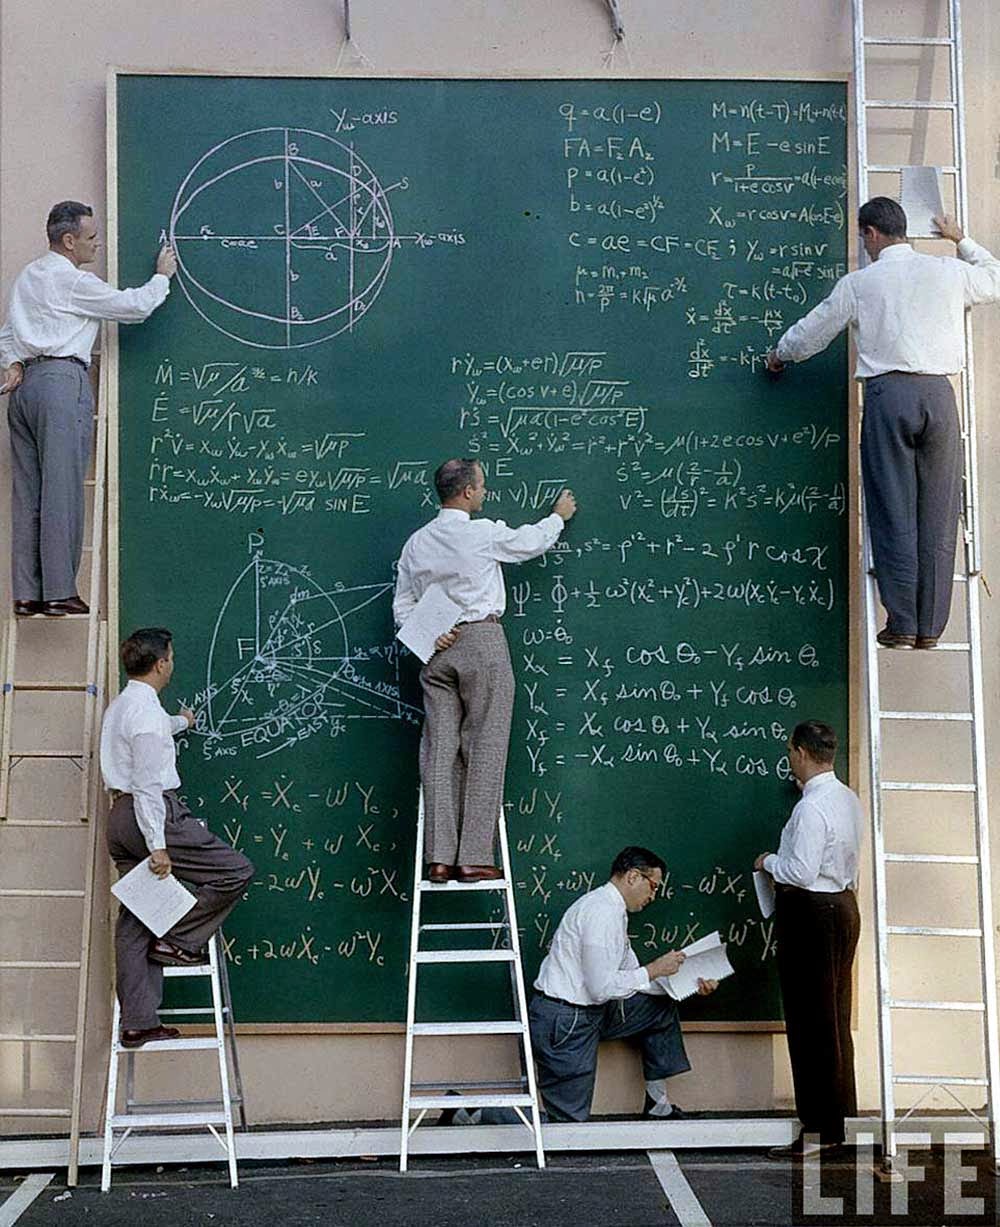 40. NASA scientists pose with their board of calculations, 1961